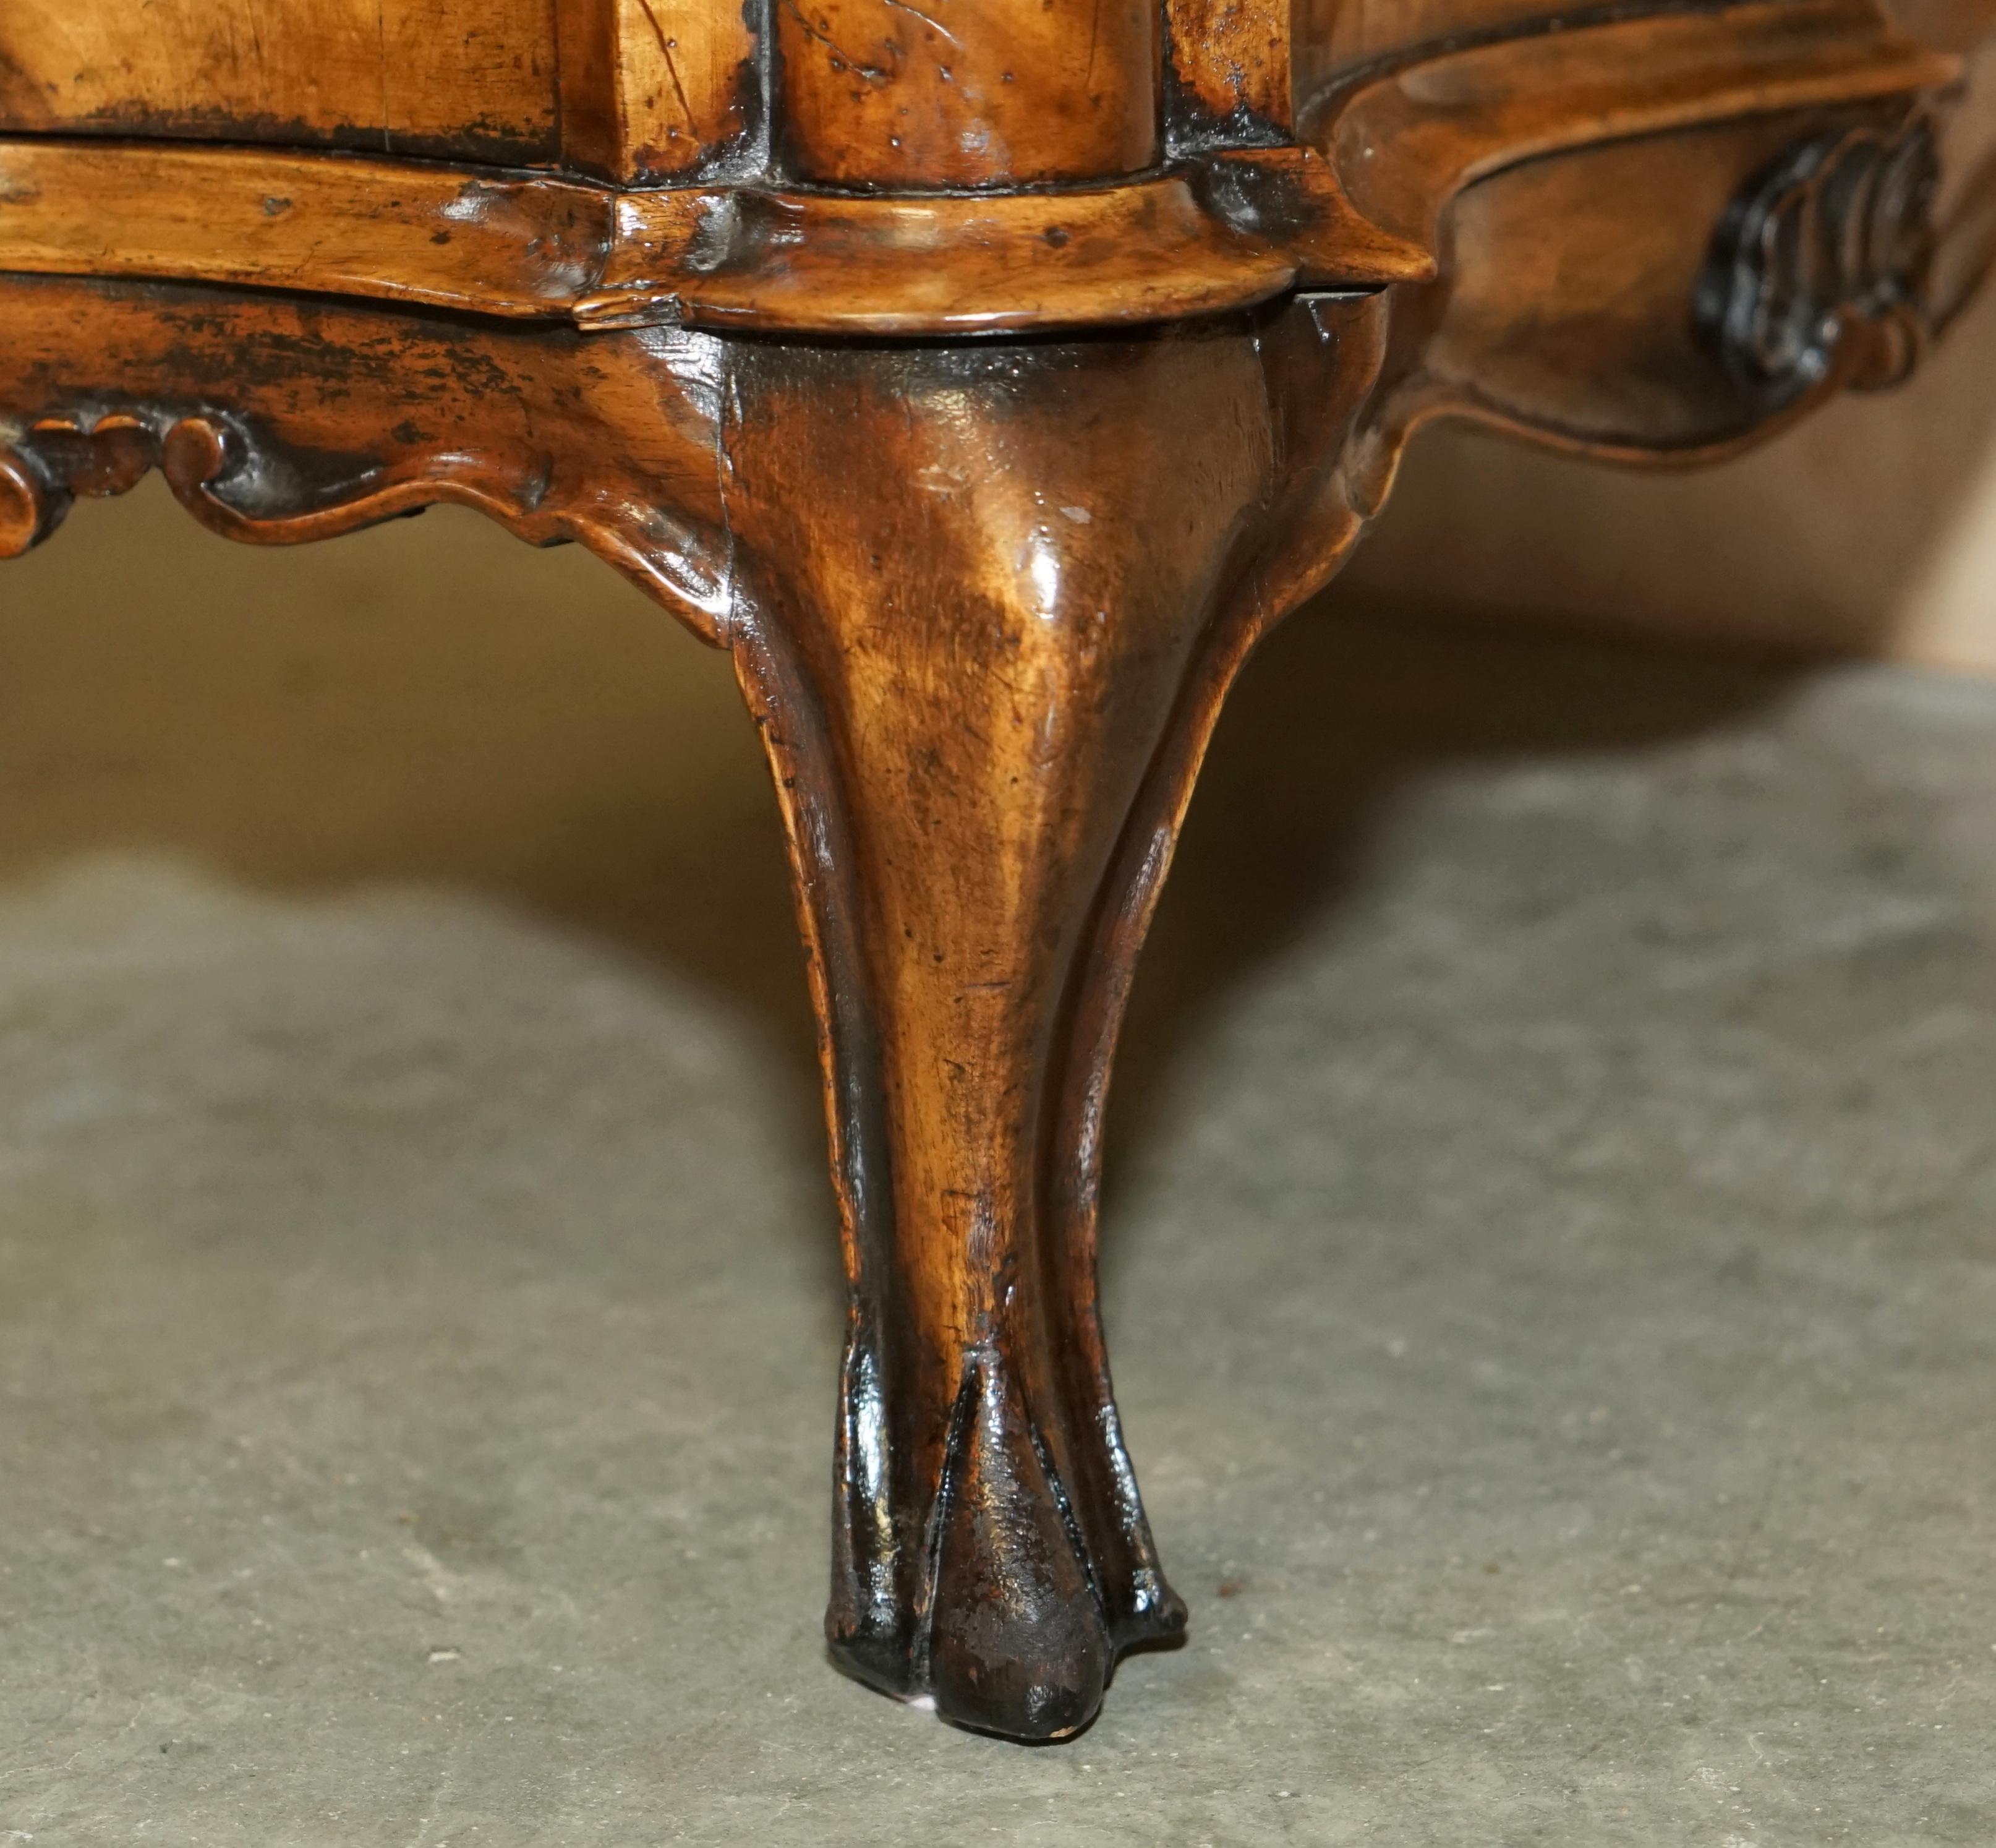 EXQUISITE ANTIQUE ITALIAN CIRCA 1860 OLIVE WOOD DESK WRITING TABLE SUBLiME WOOD For Sale 4